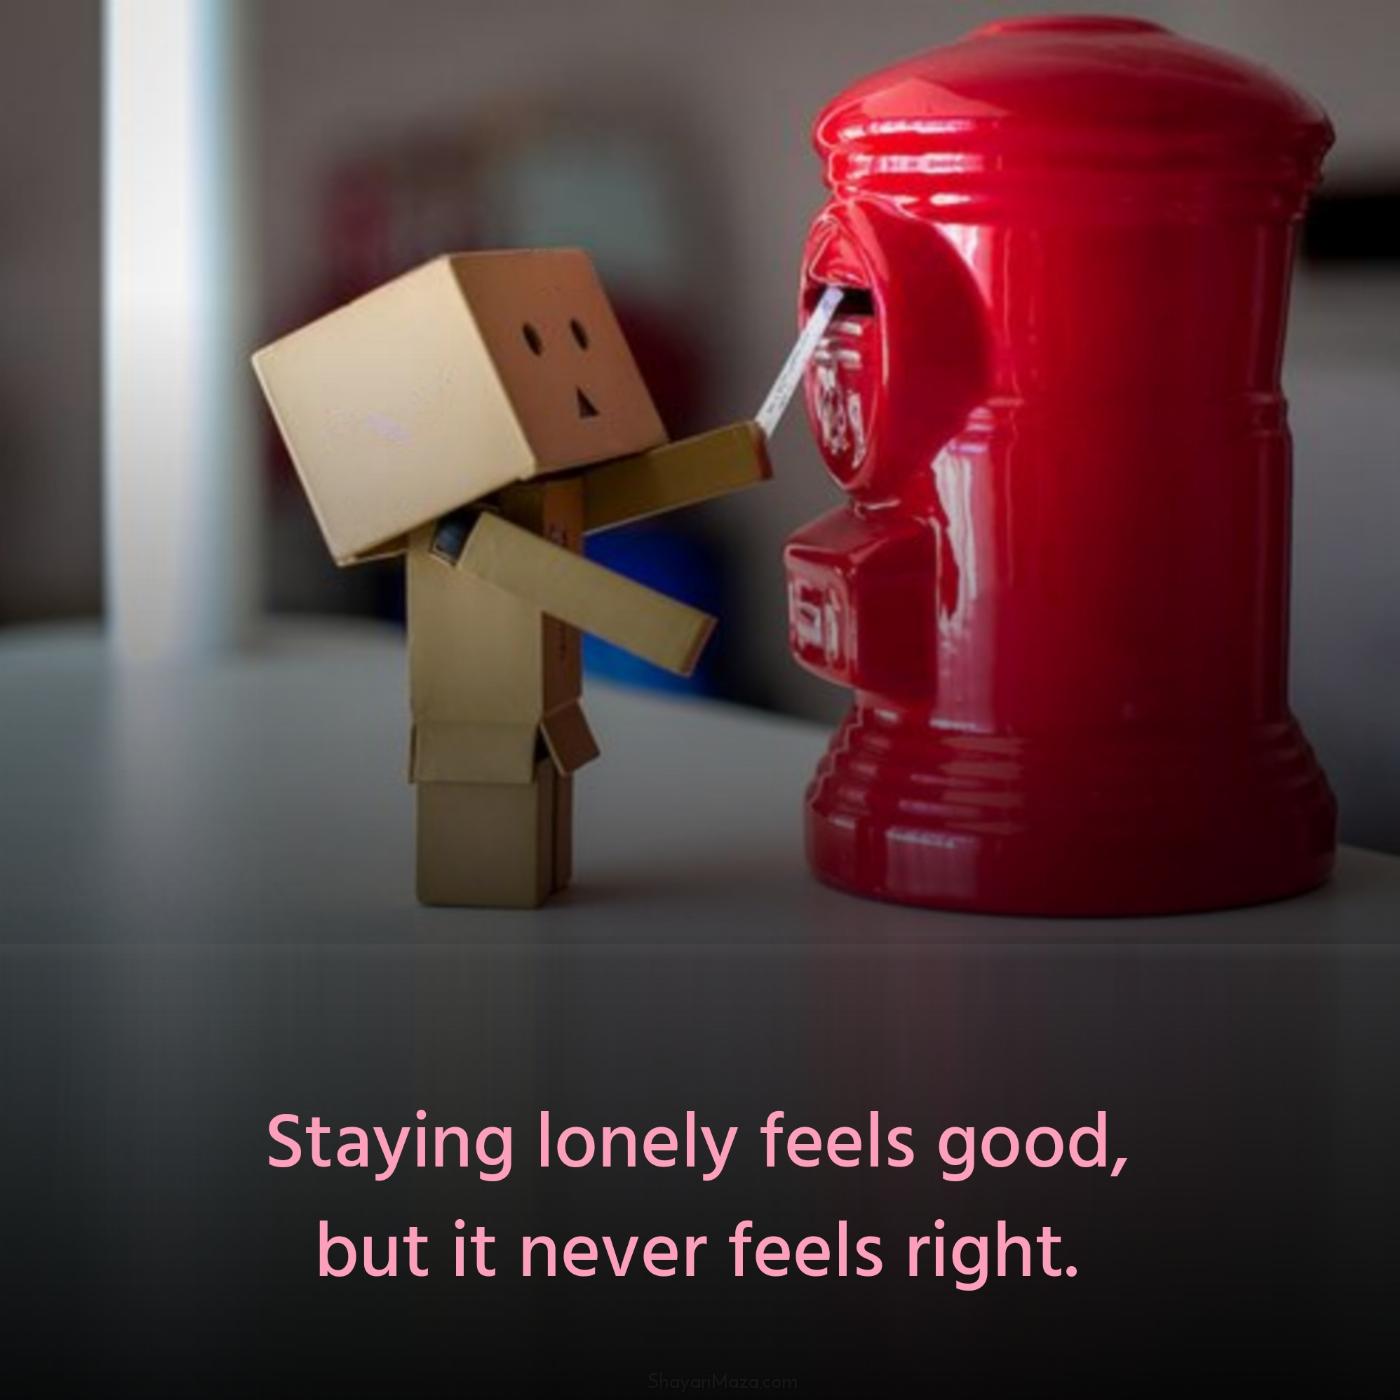 Staying lonely feels good but it never feels right